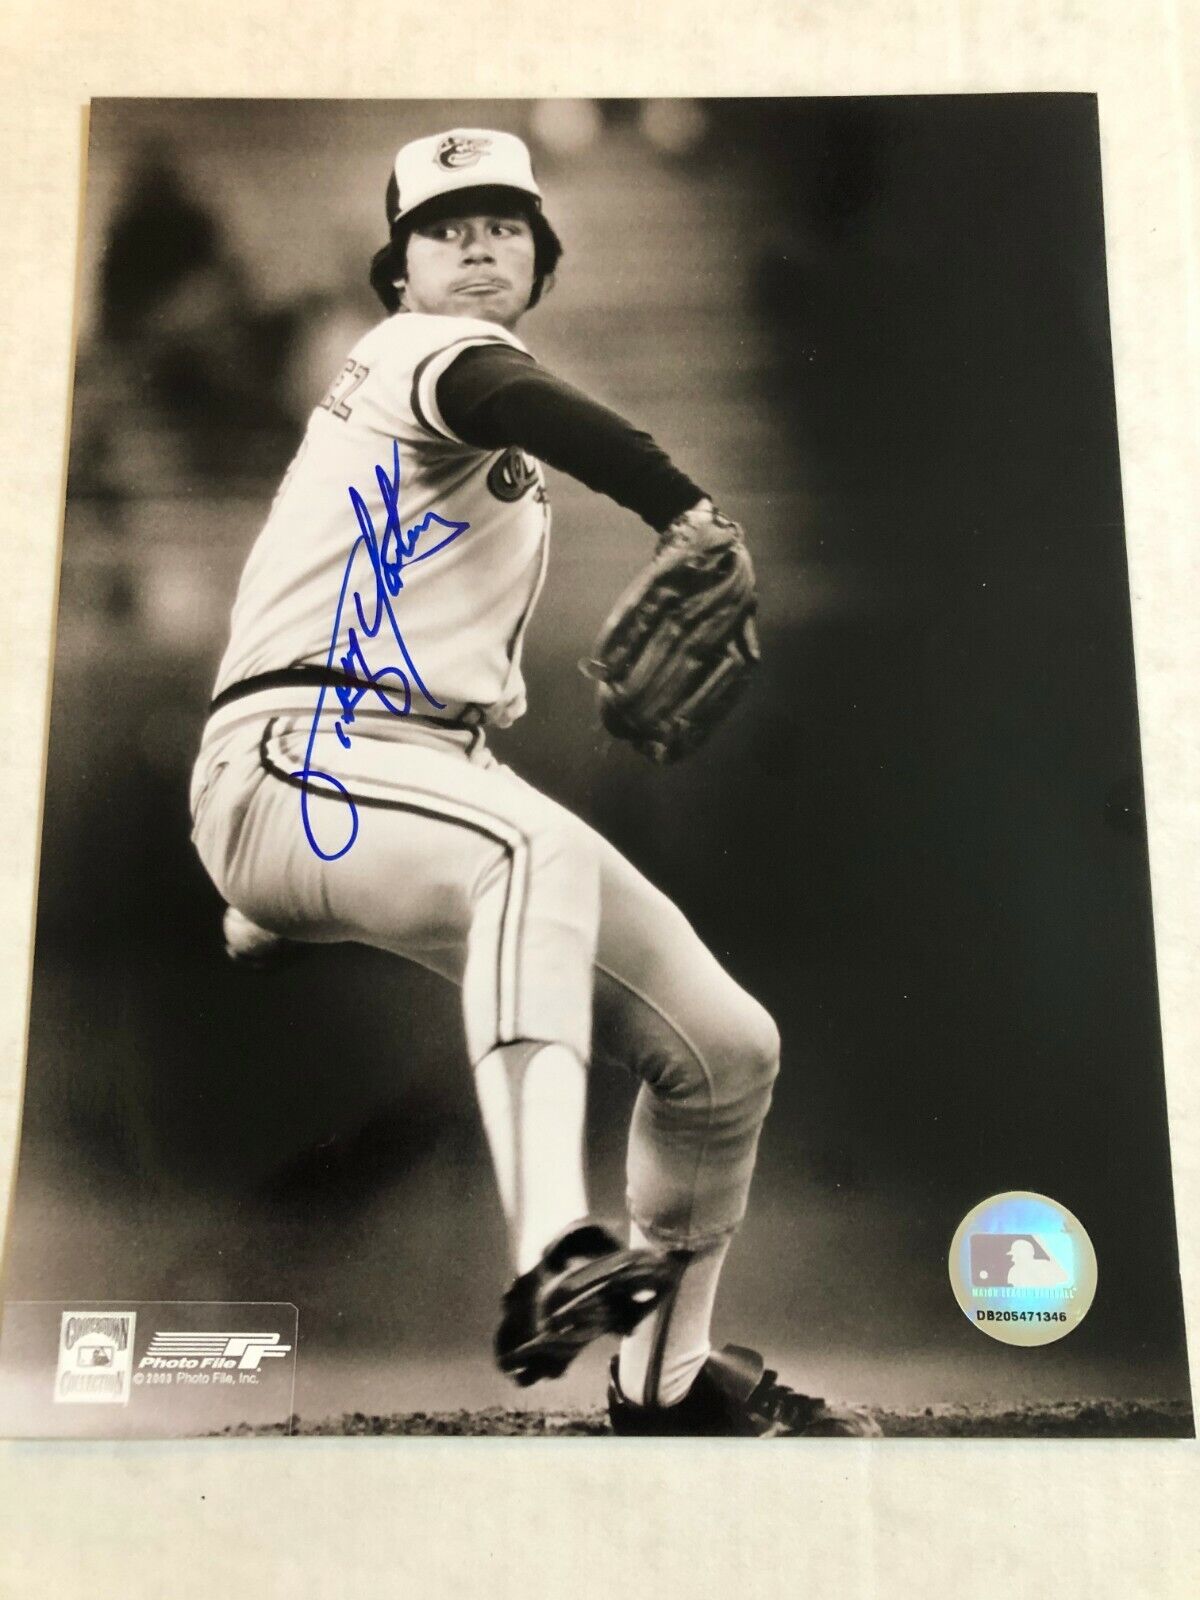 TIPPY MARTINEZ Baltimore Orioles 8x10 B&W Signed Autographed Photo